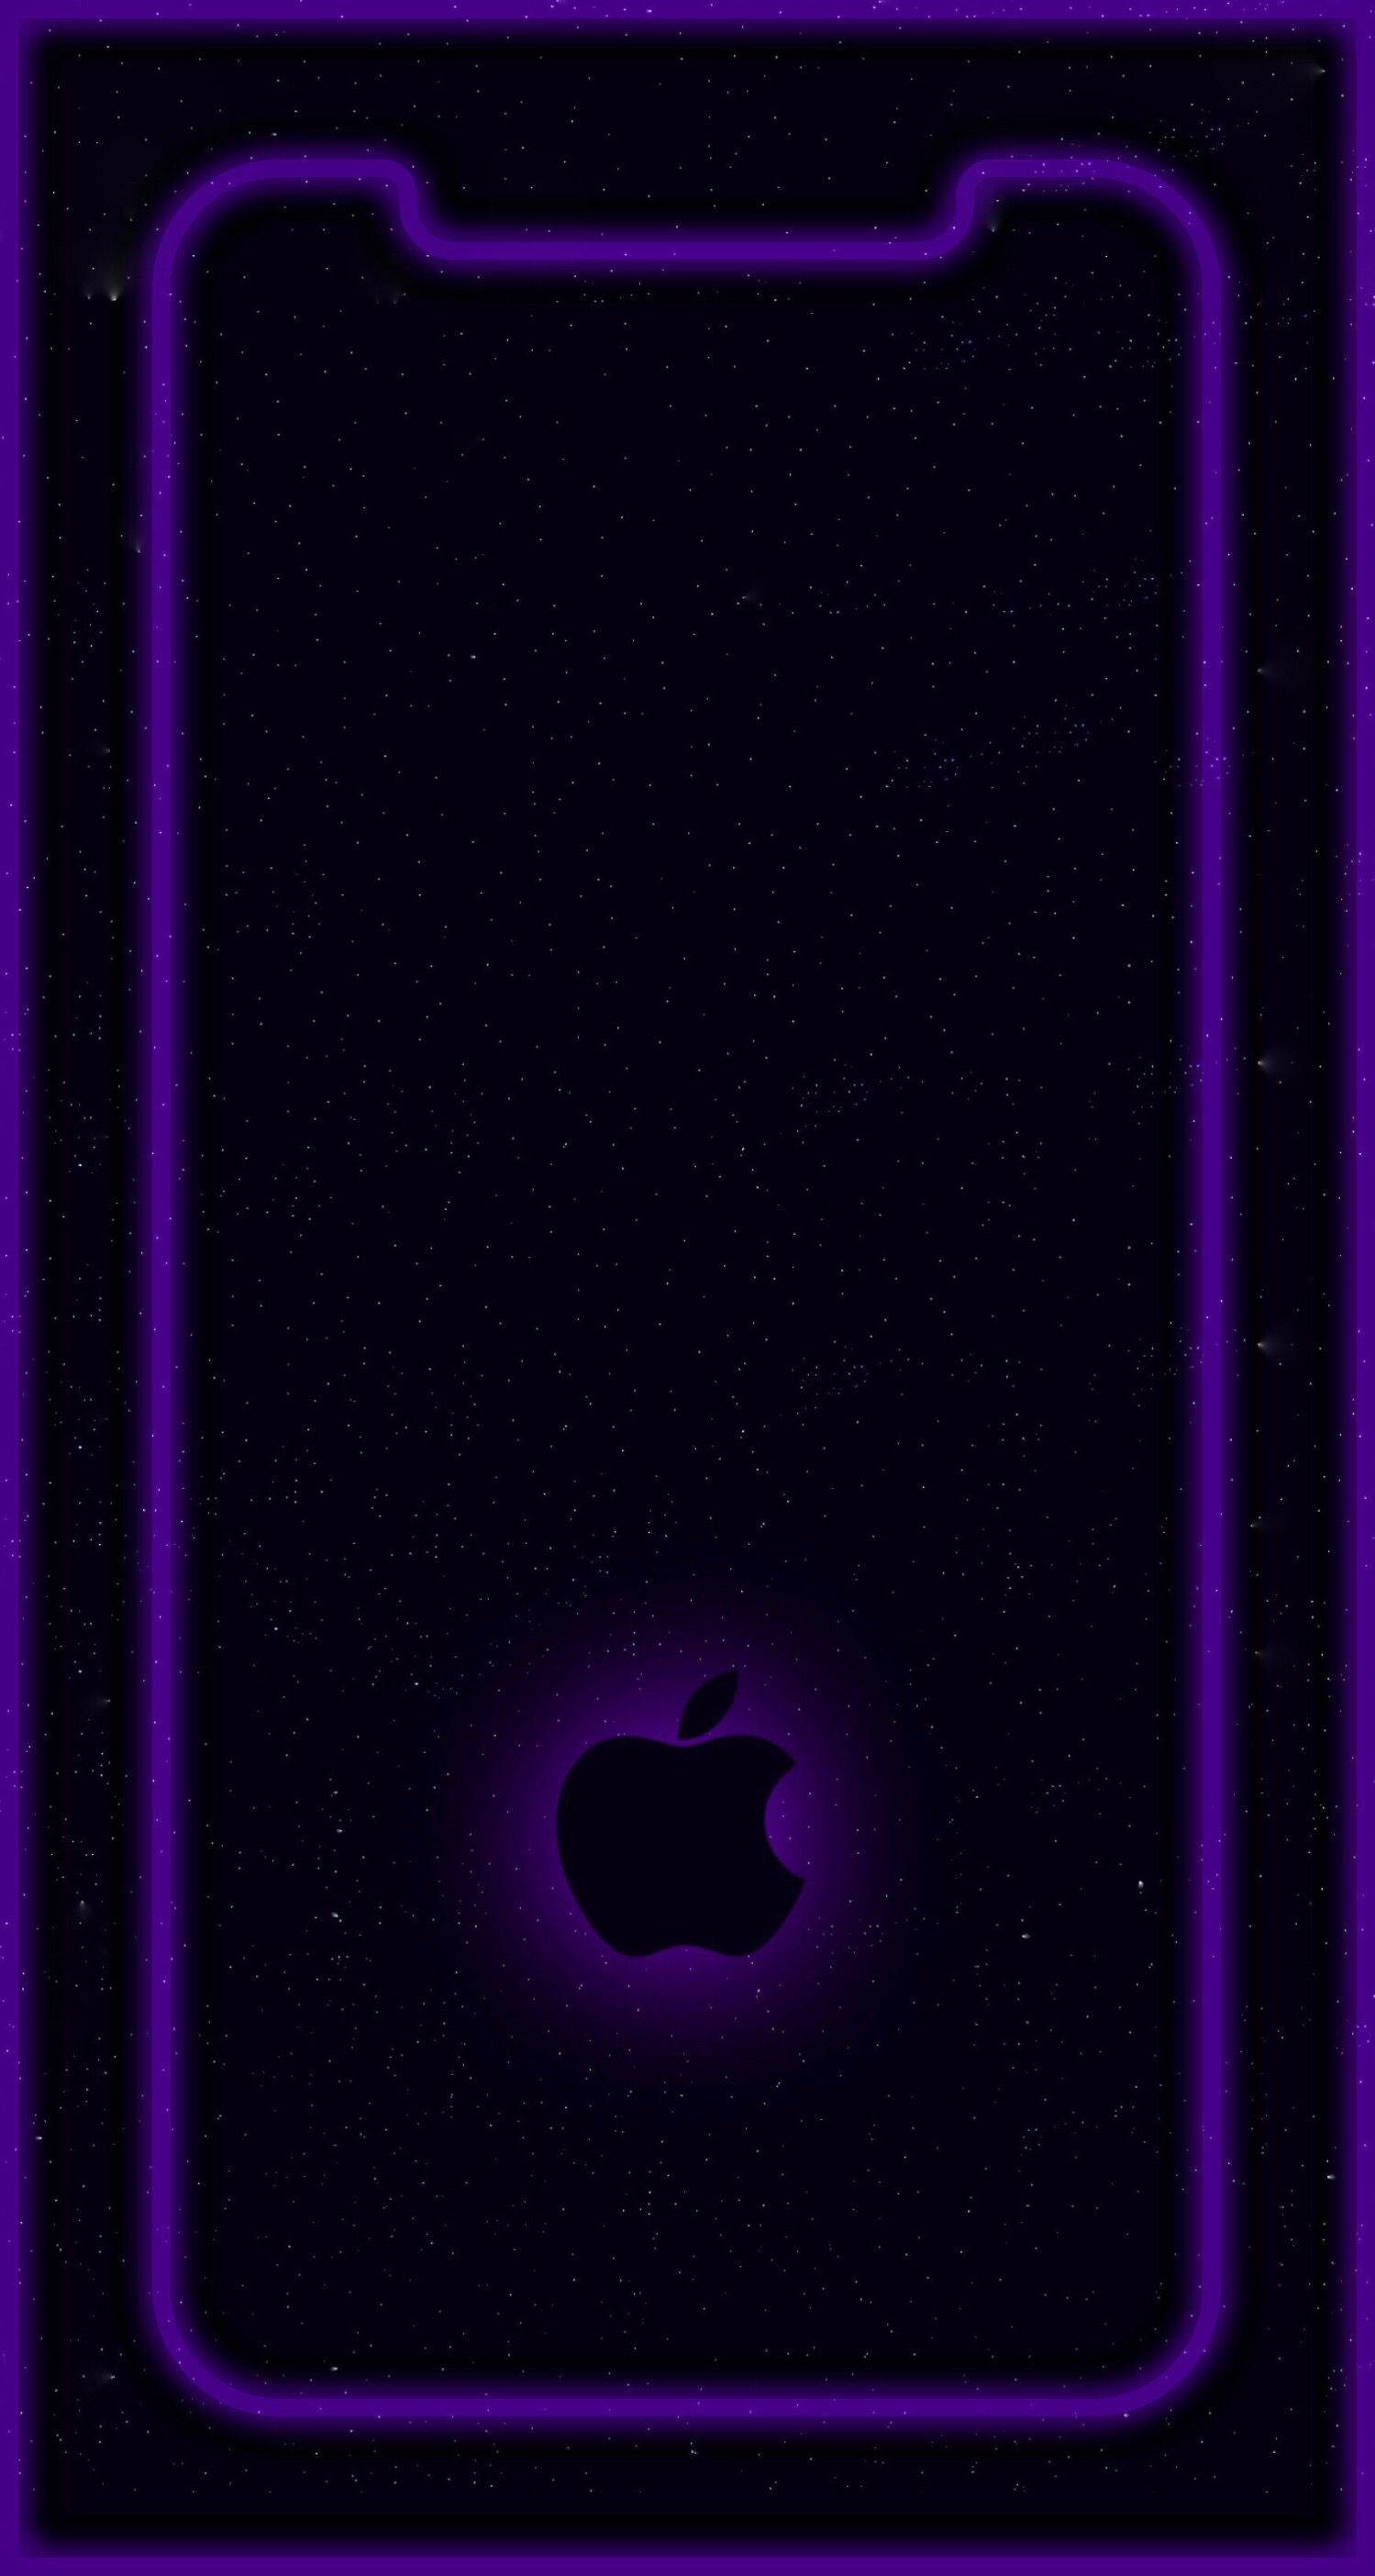 iPhone X Outline Wallpaper Free .wallpaperaccess.com